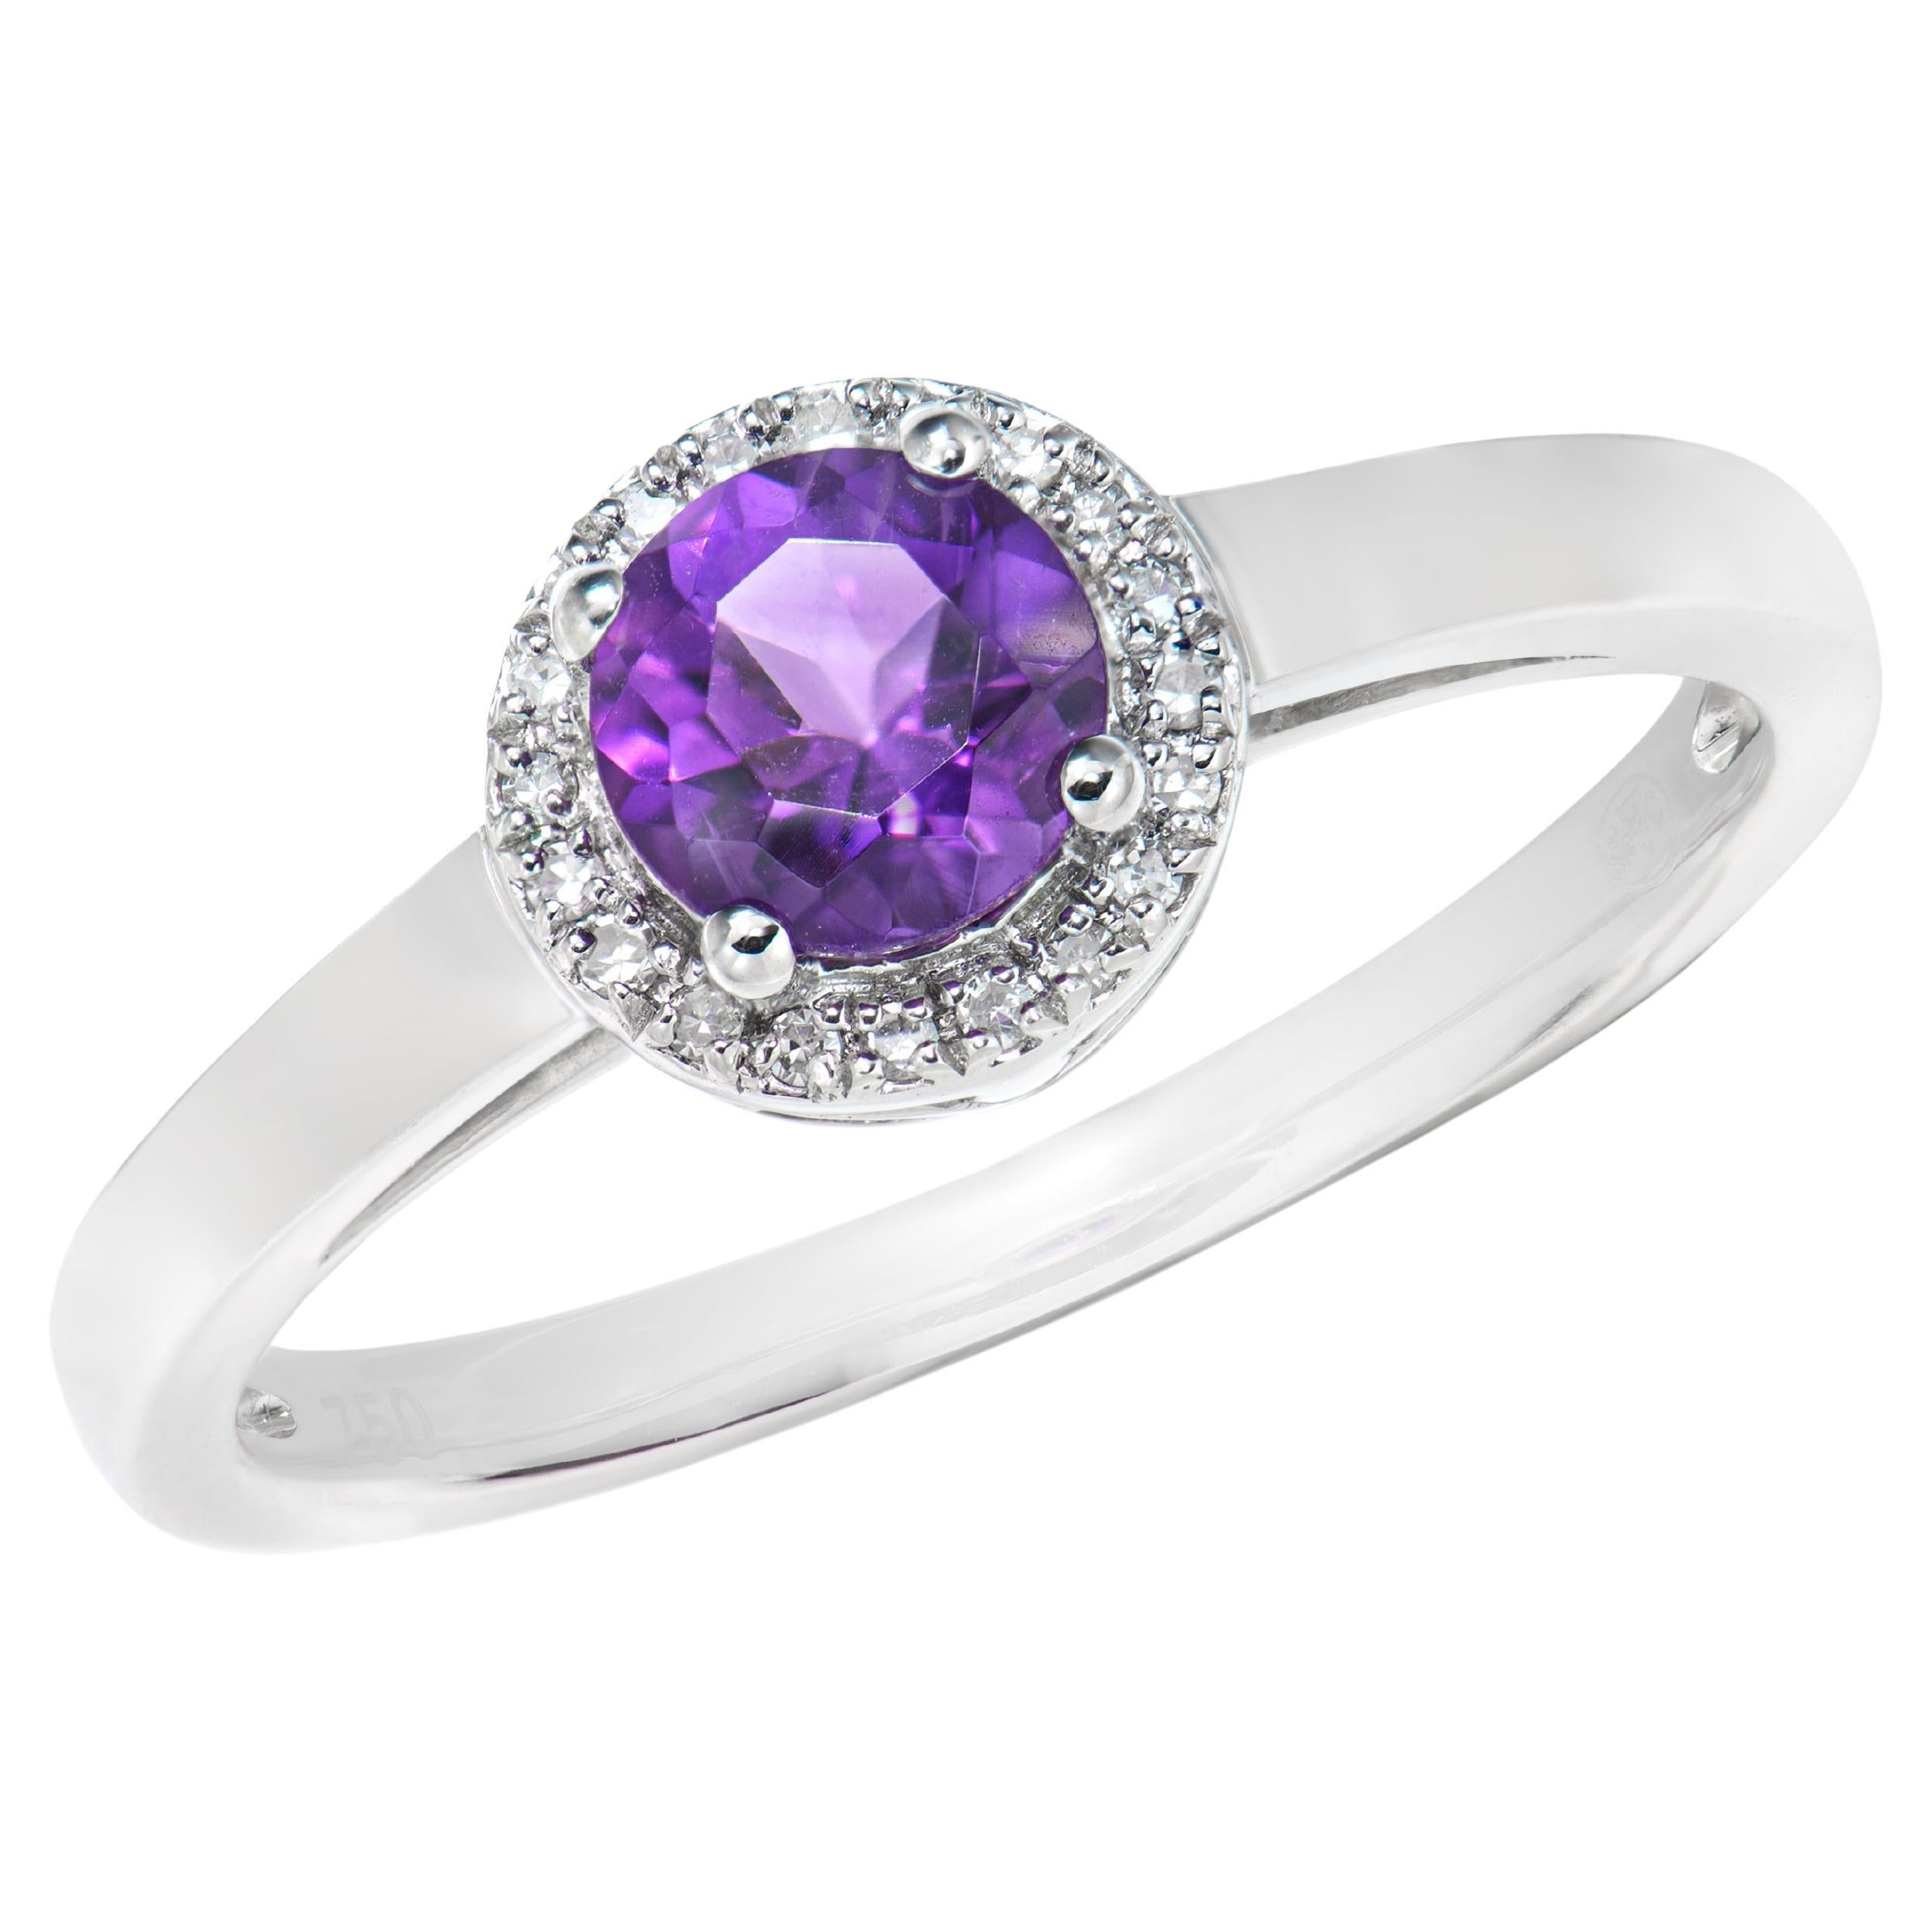 0.40 Carat Amethyst Fancy Ring in 18Karat White Gold with White Diamond.   For Sale